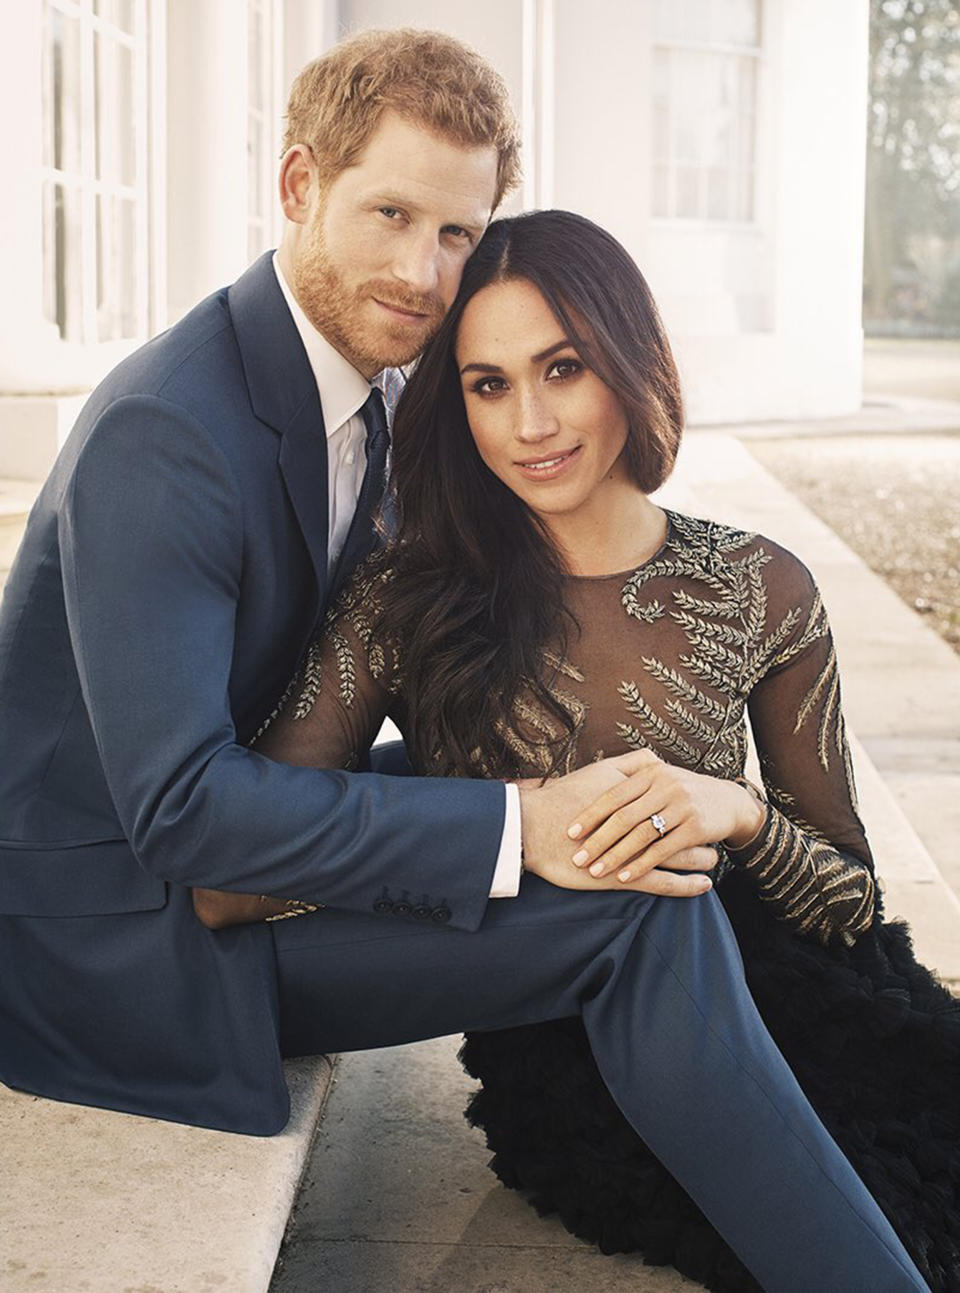 THE OFFICIAL ENGAGEMENT PHOTOGRAPHS OF PRINCE HARRY AND MS. MEGHAN MARKLE (Kensington Palace)